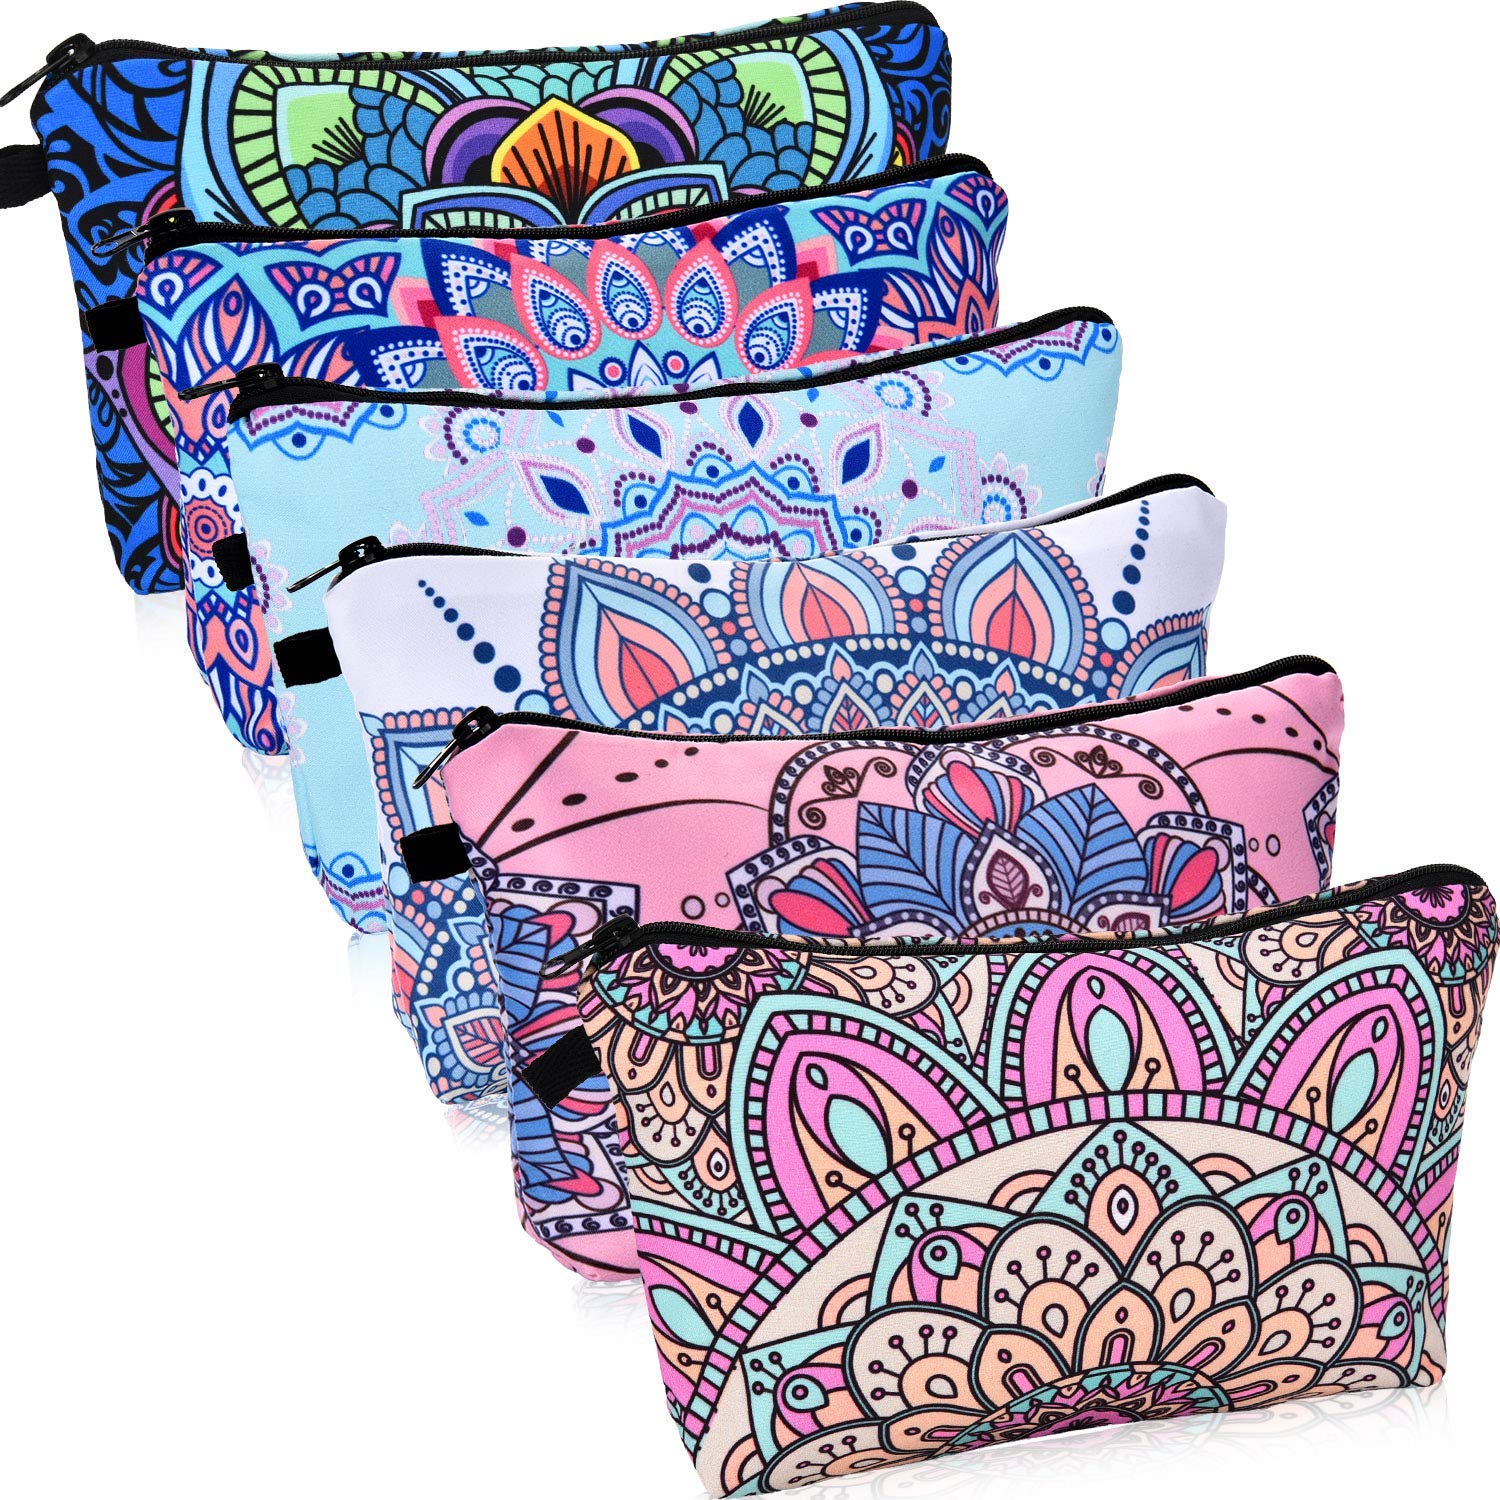 Chuangdi 6 Pieces Makeup Bag Toiletry Pouch Waterproof Cosmetic Bag with Zipper Travel Packing Bag 8.7 x 5.3 Inch Small Cosmetic Bag Accessory Organizer for Women and Men (Multicolor Style)